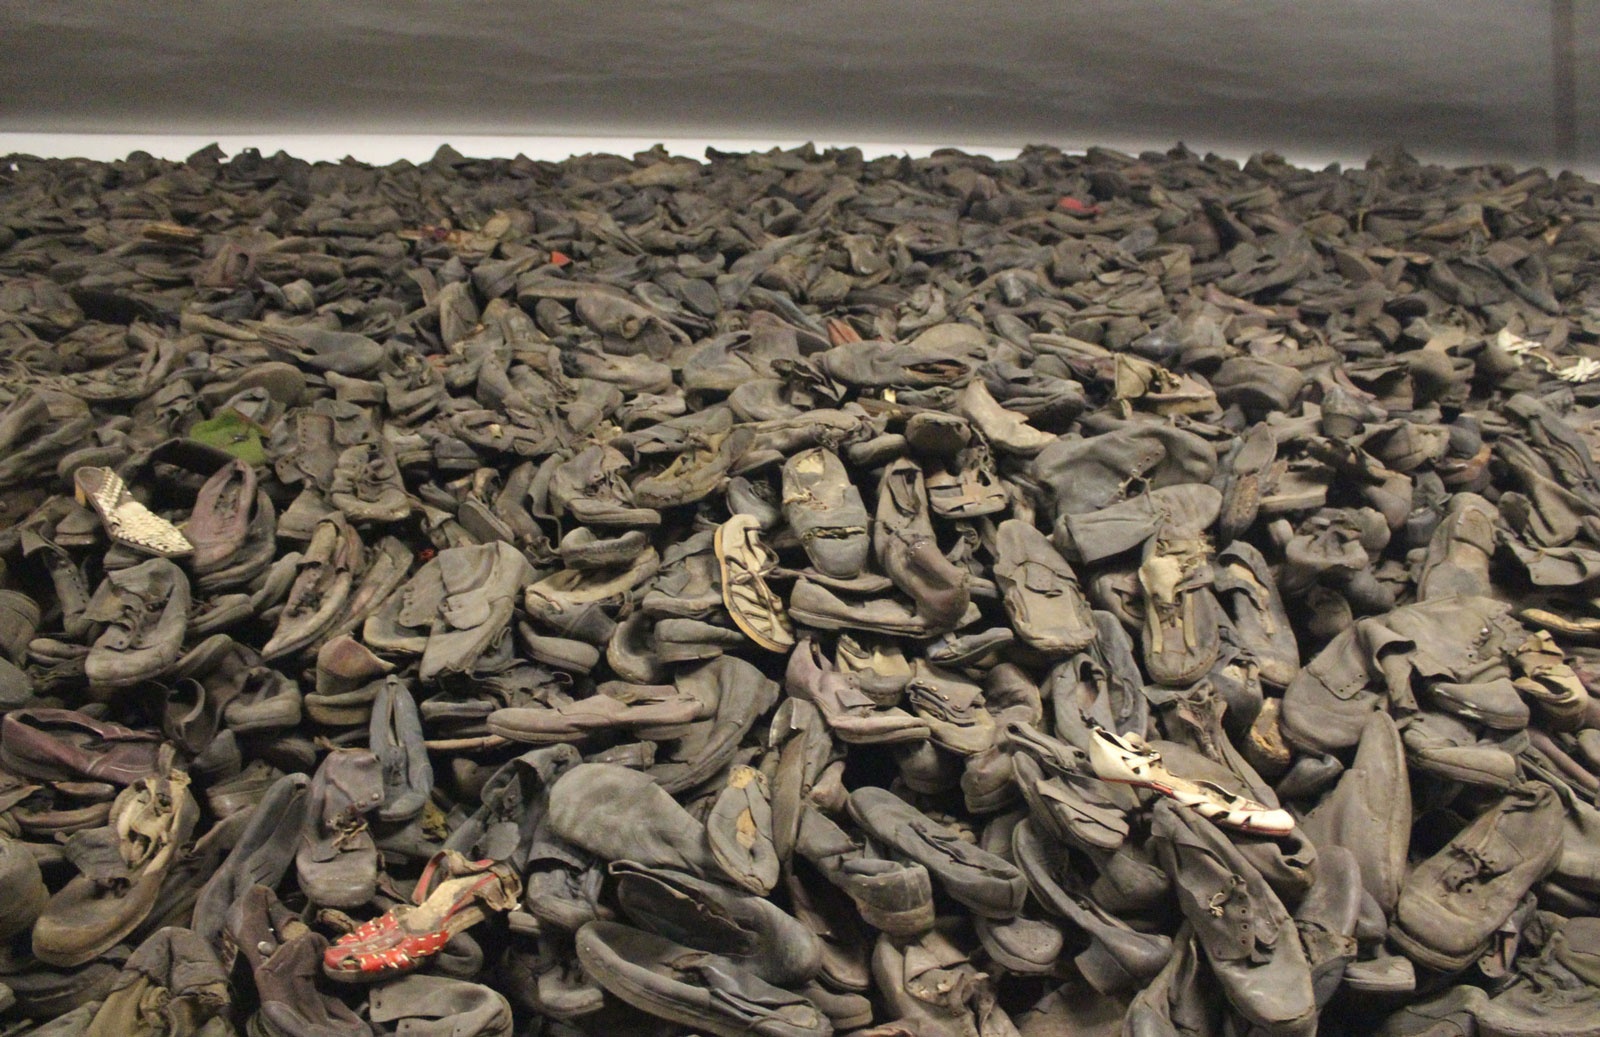 Huge pile of shoes